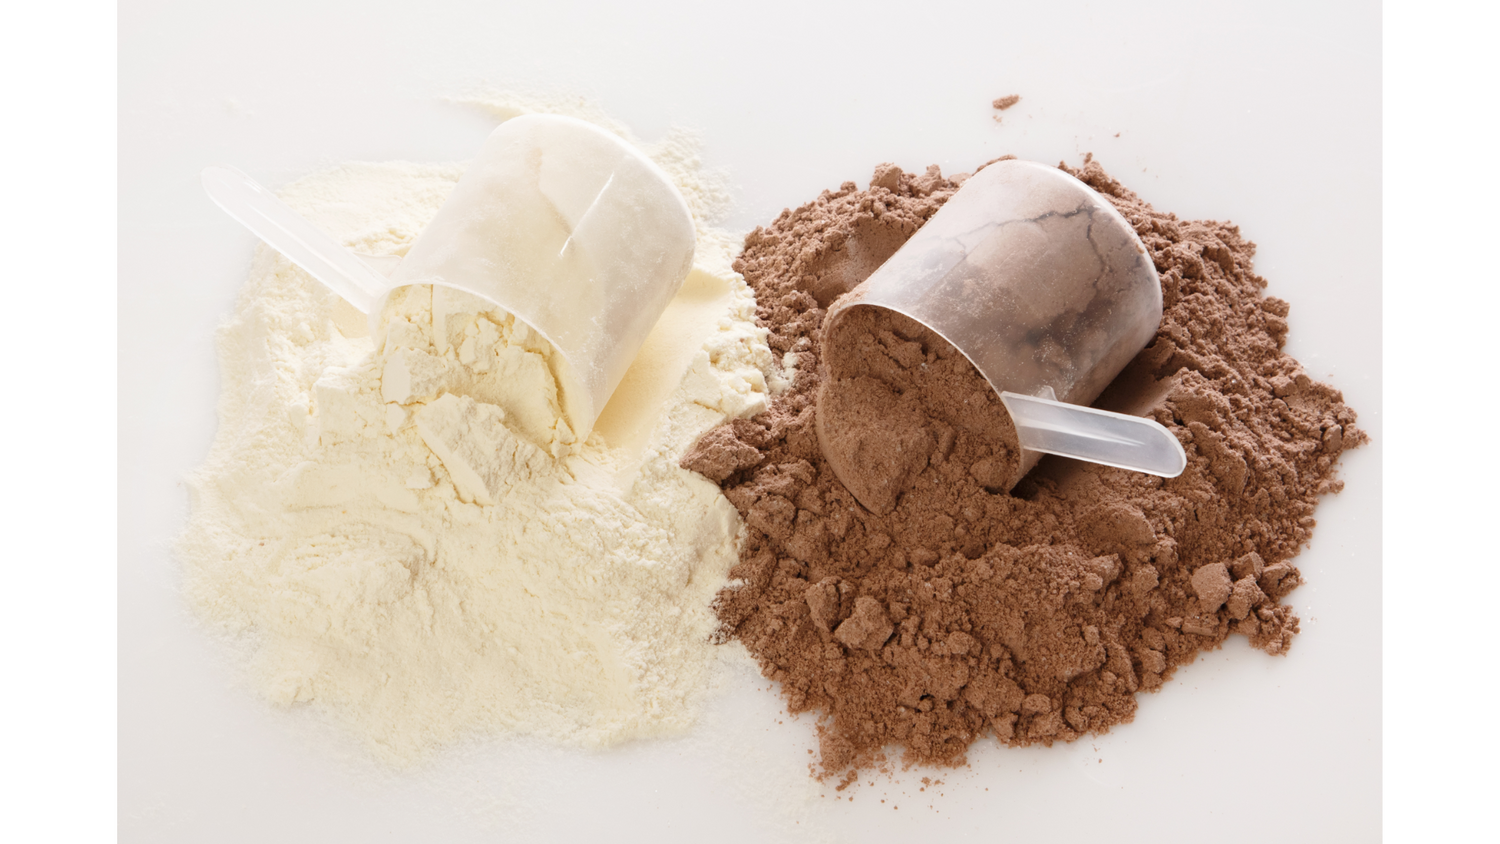 Vanilla and chocolate protein powder with scoops